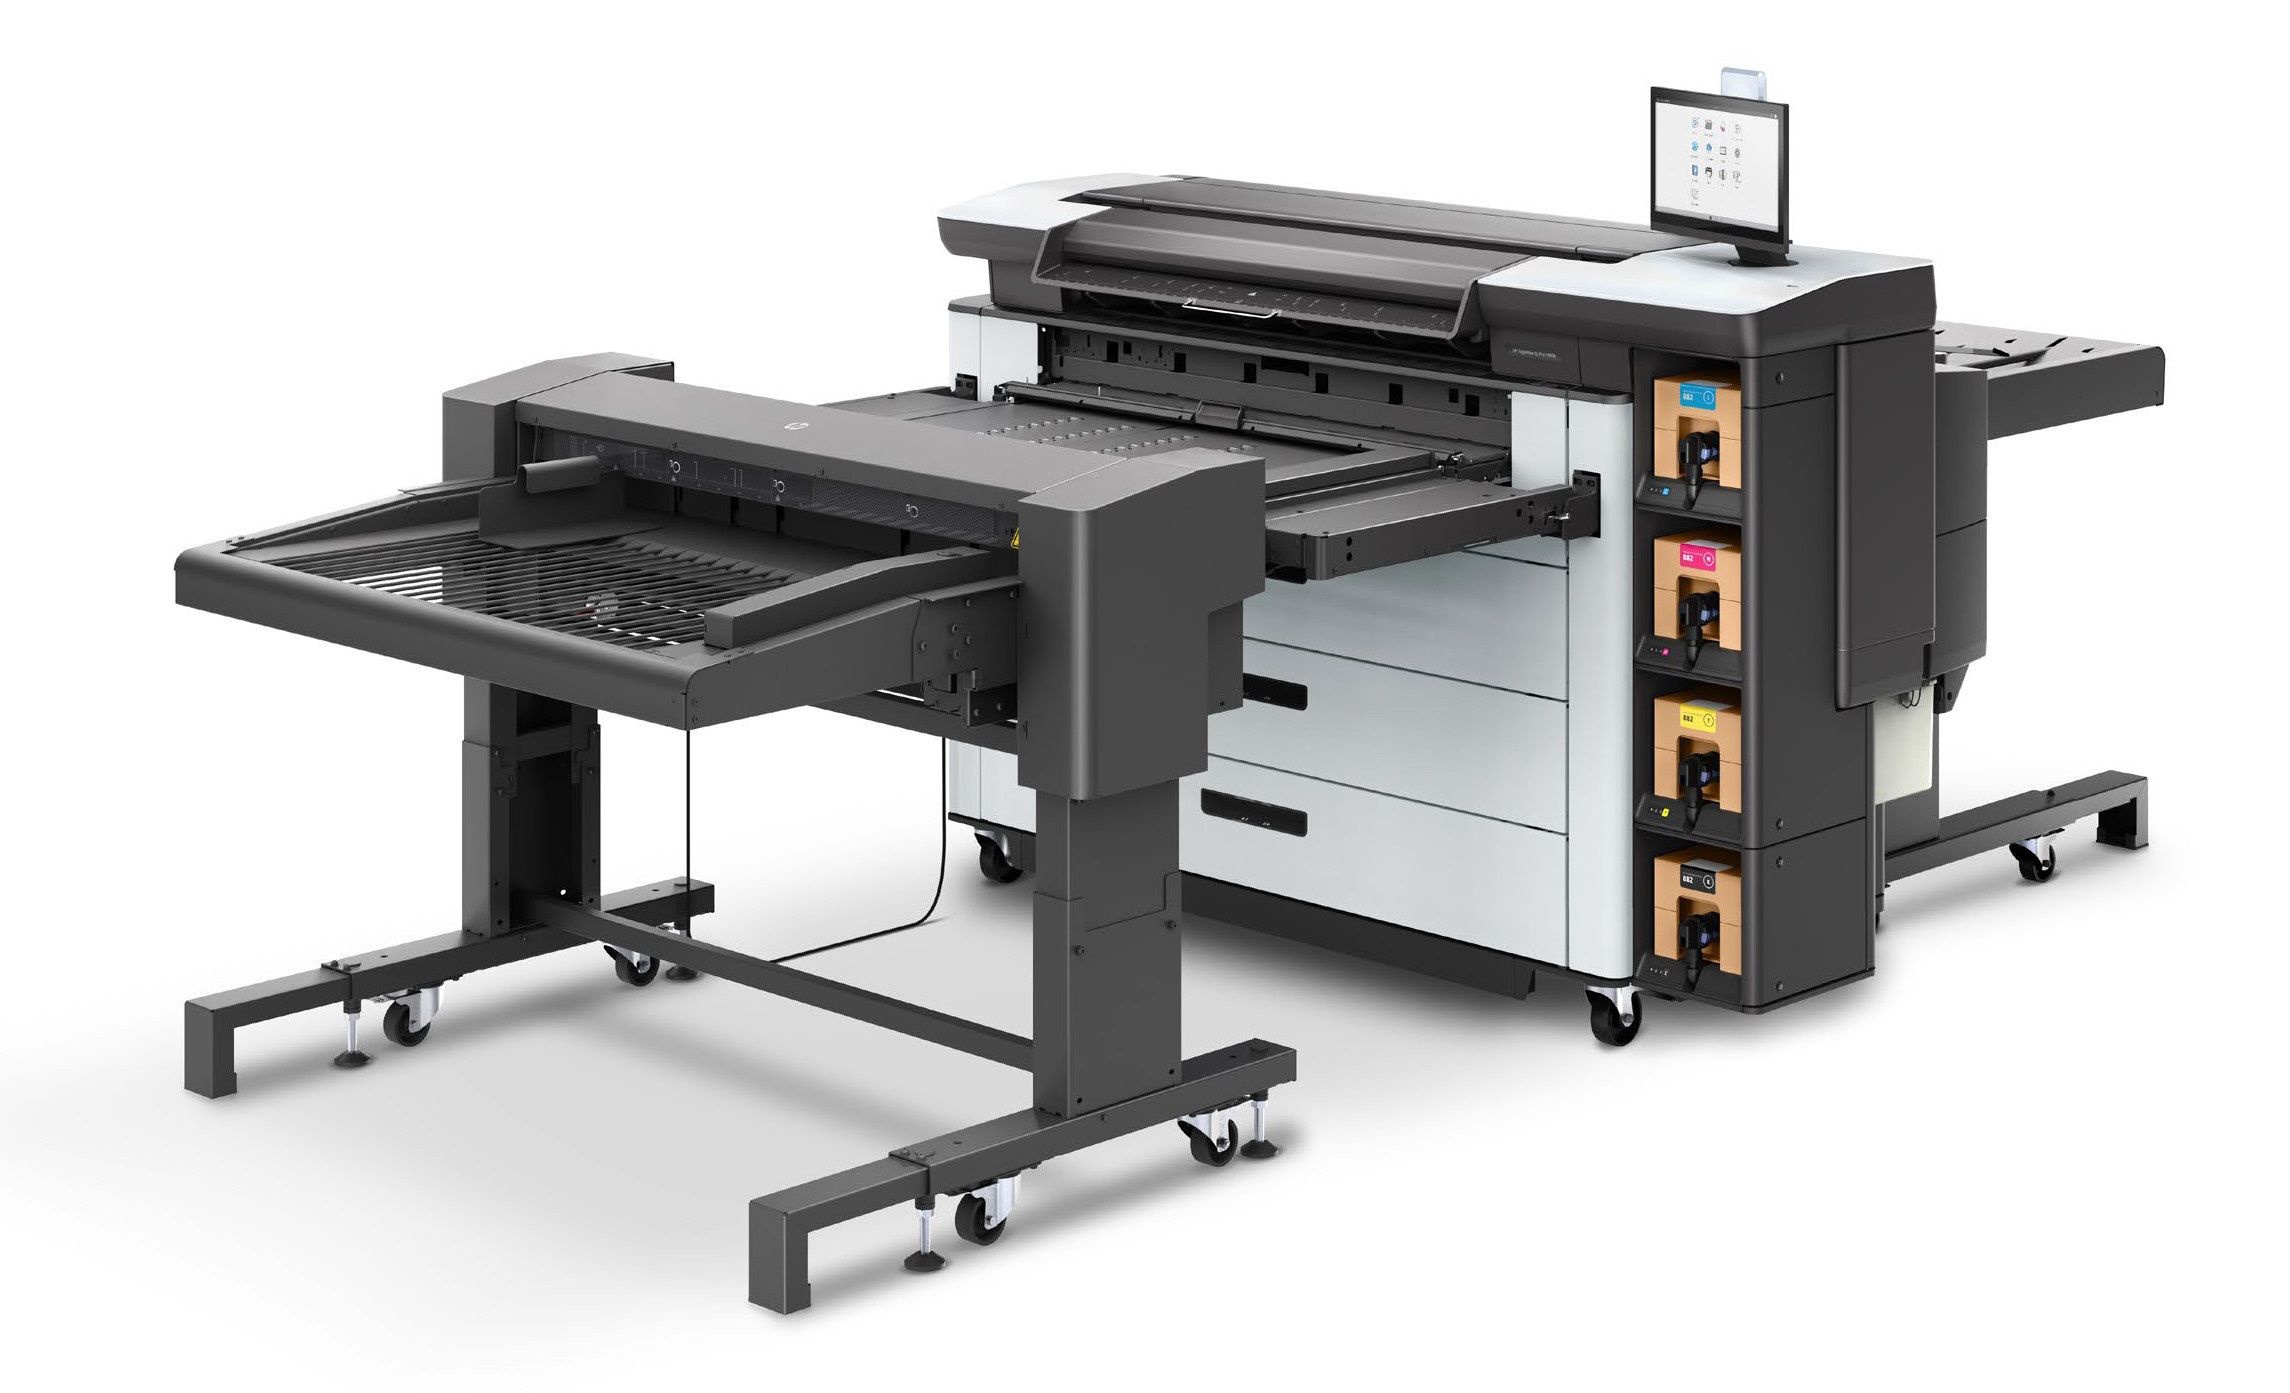 HP PageWide XL Pro Sheet feeder graphic image